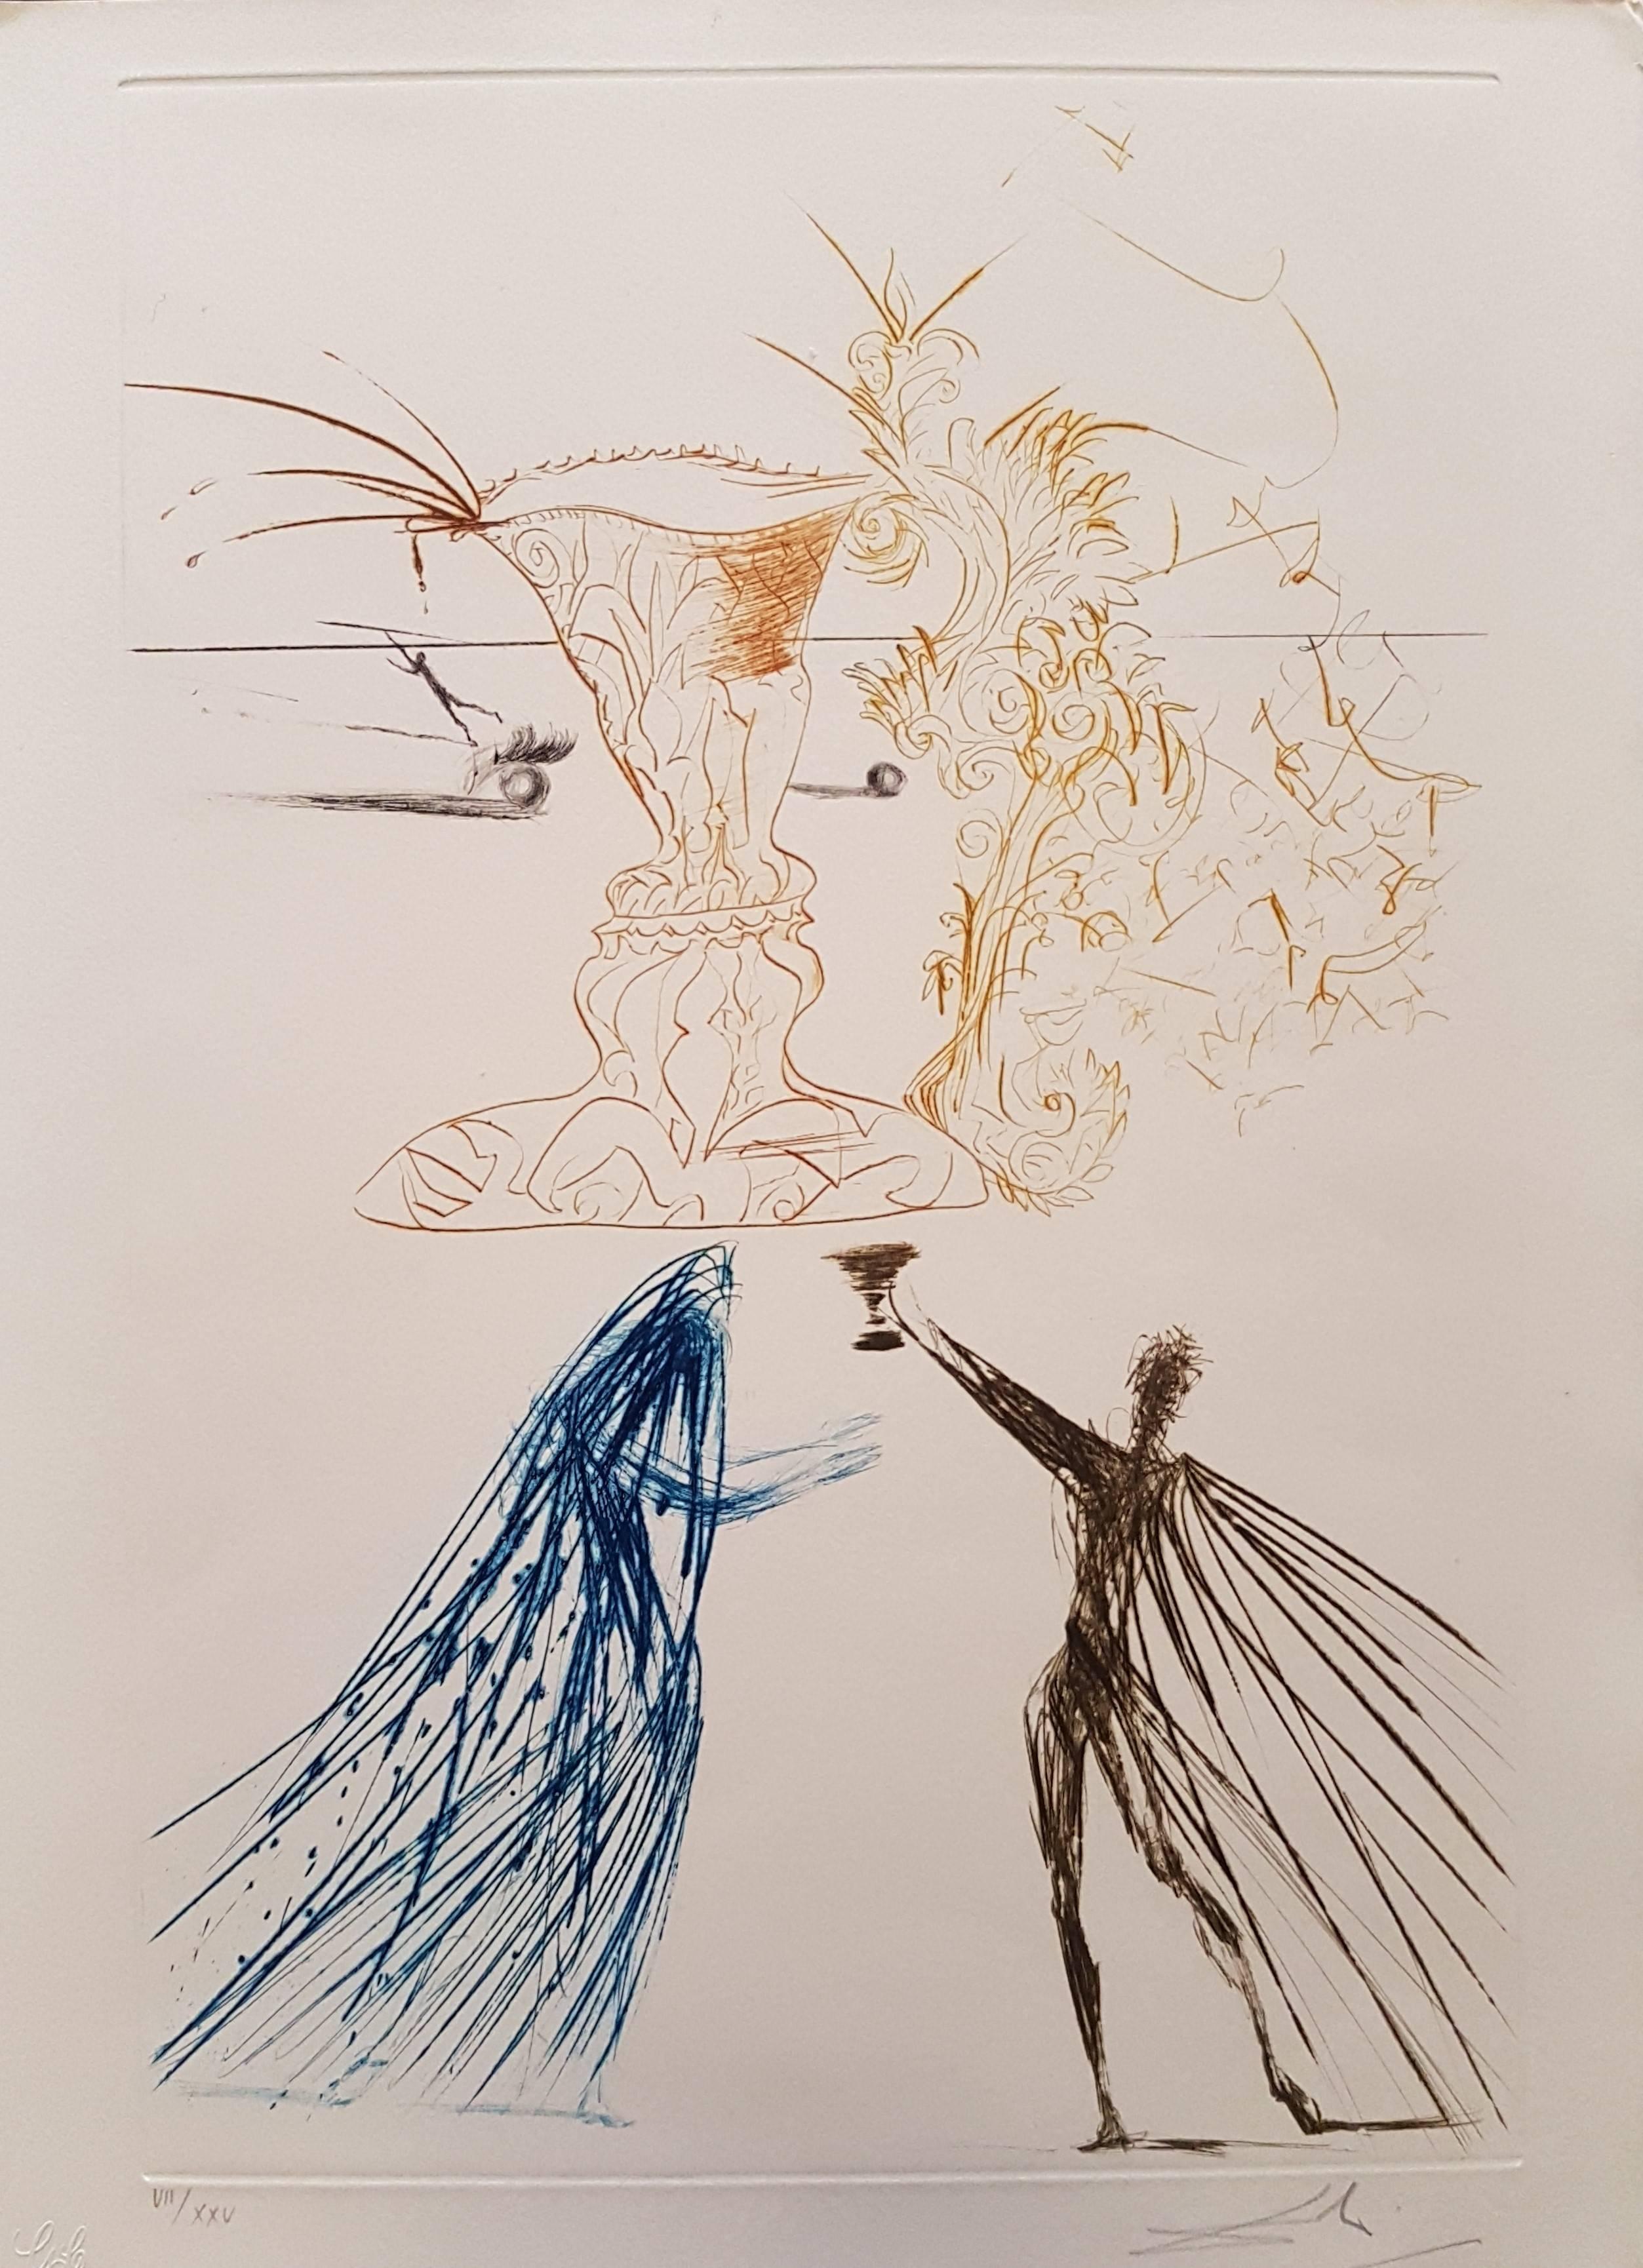 Salvador Dalí Abstract Print - Tristan and Isolde - Original Drypoint by S. Dalì - 1969